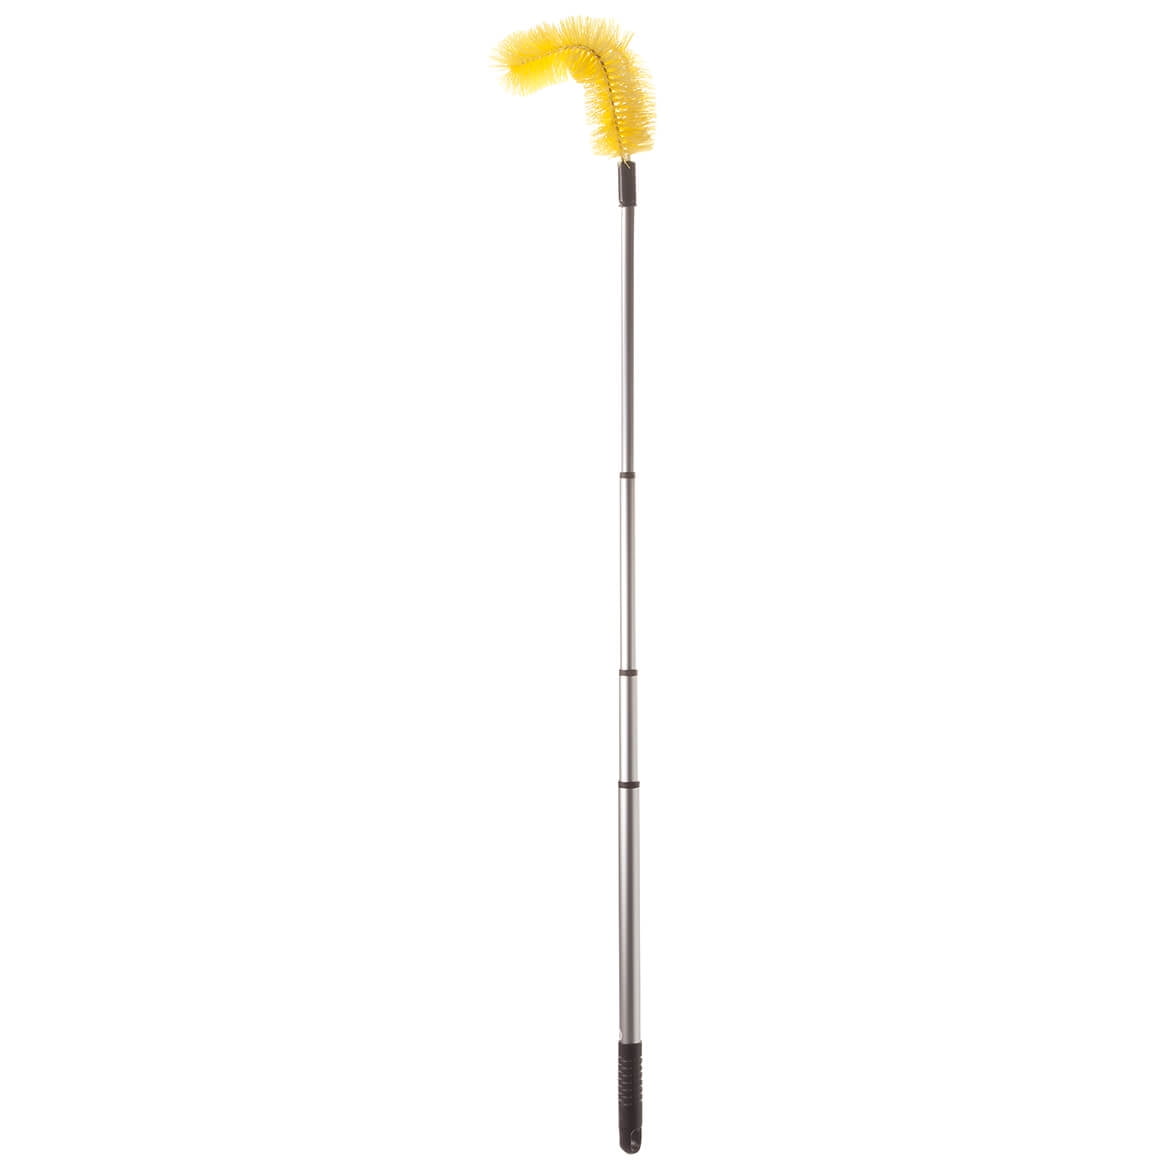 Car Wash Brush with Long Handle(5FT-11FT),12 Yellow Brush Head,Water Flow  Extension Pole with an ON/OFF Switch,Car Washing Brush with Hose Attachment